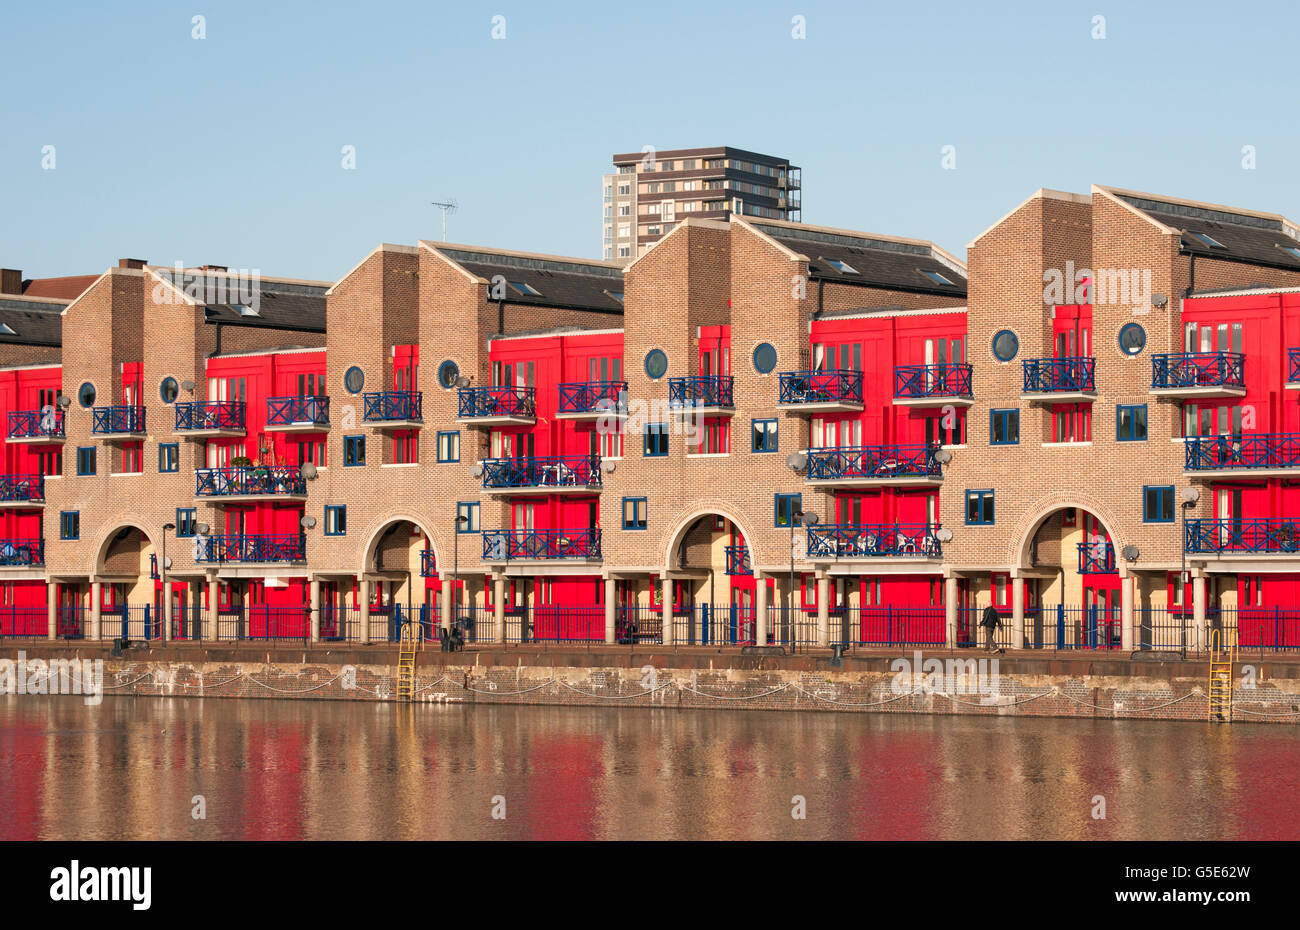 Shadwell Basin riverside apartments in Docklands, Wapping, East London, England, United Kingdom, Europe Stock Photo